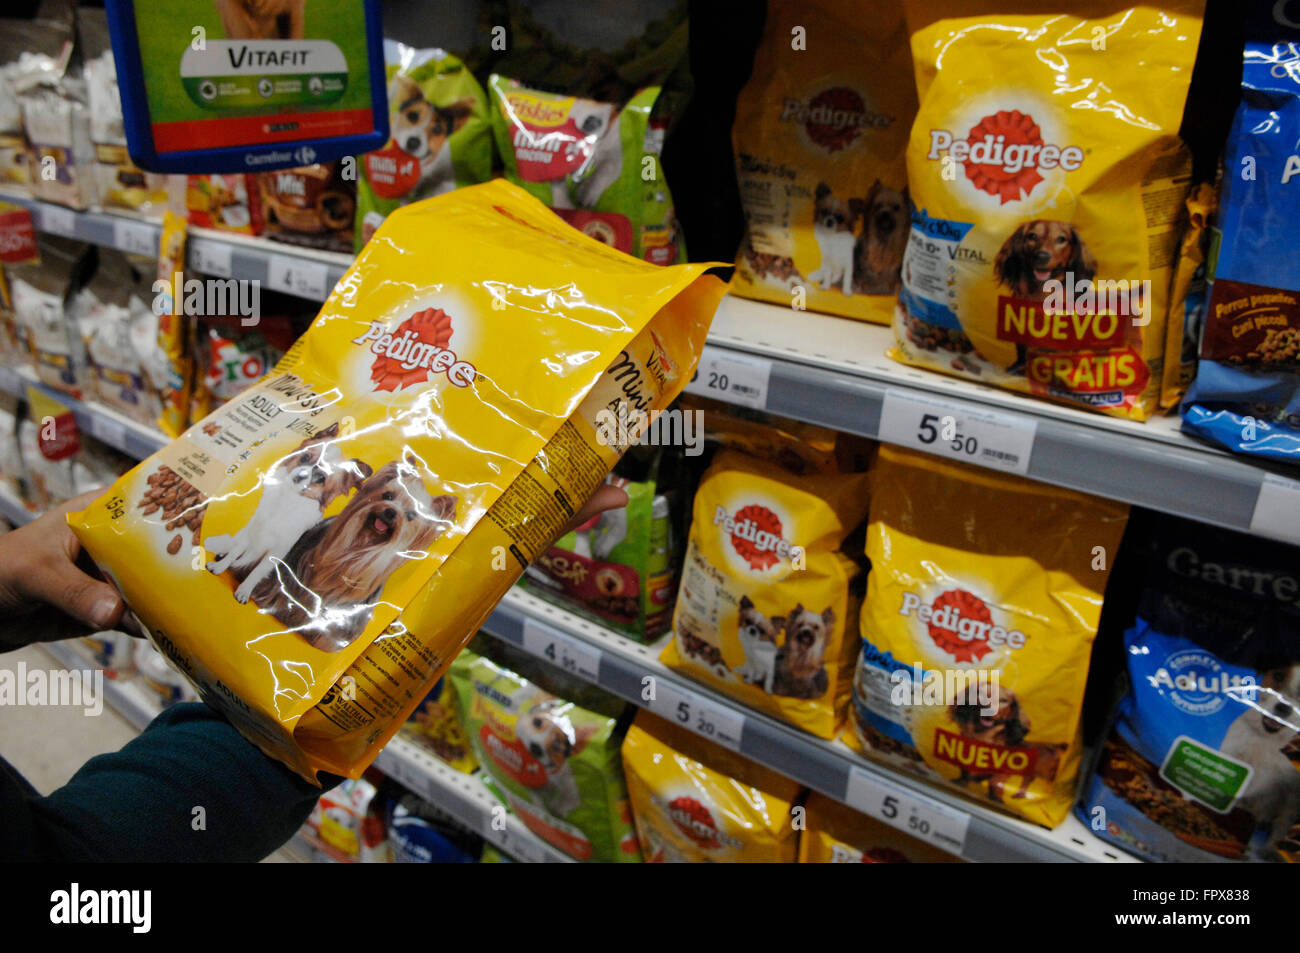 Pedigree Dog Food on sale in a Carrefour Supermarket in Malaga Spain. Stock Photo